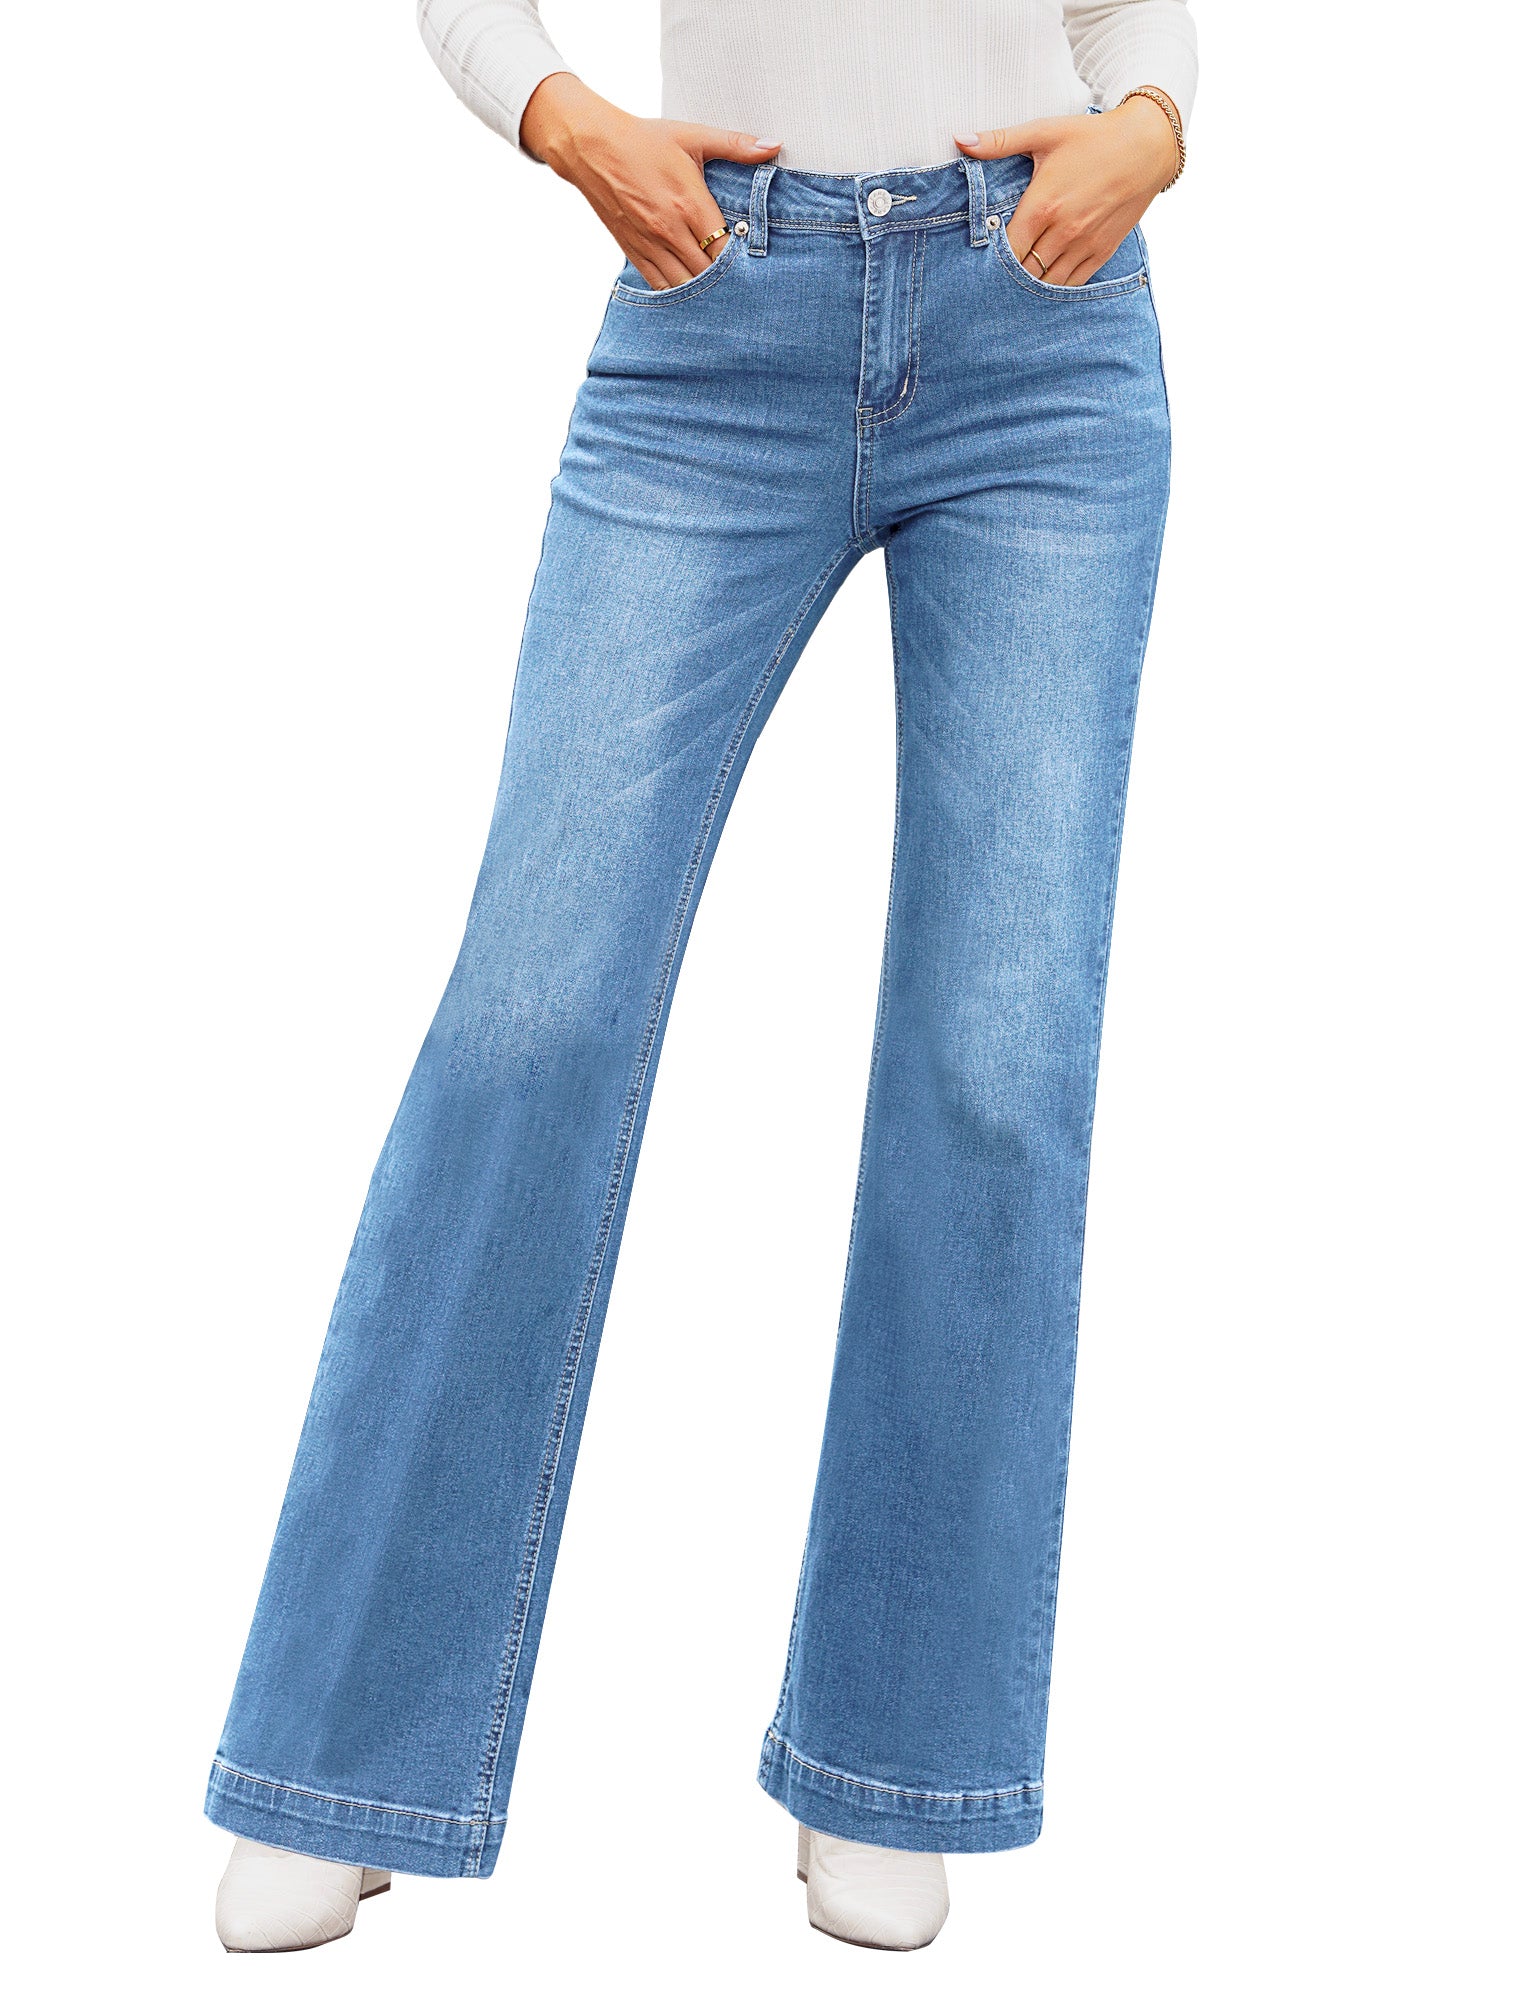 Retro Ripped Flared High Waist Wide Legs Loose Jeans Casual Slim Pants with  Pockets